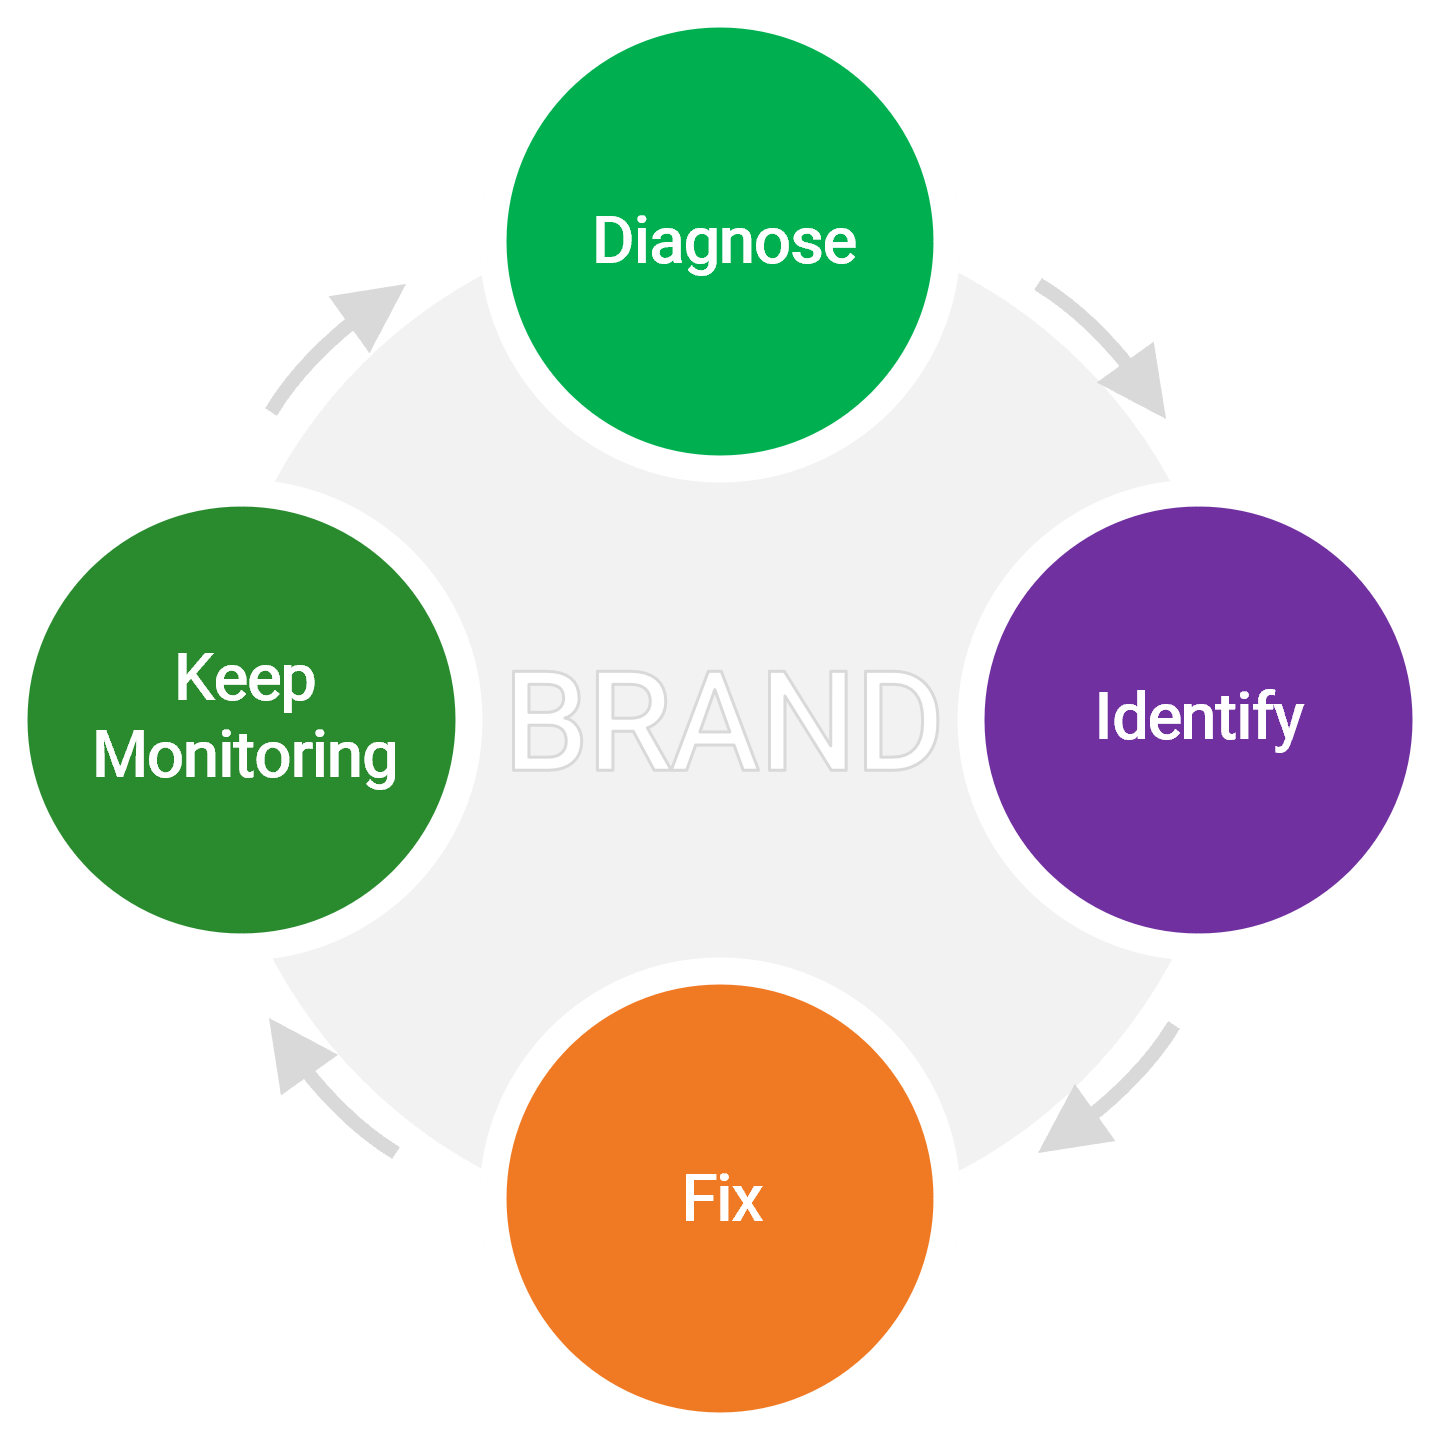 Cycle titled 'BRAND' with steps 'Diagnose', 'Identify', 'Fix', 'Keep Monitoring' and back to 'Diagnose'.